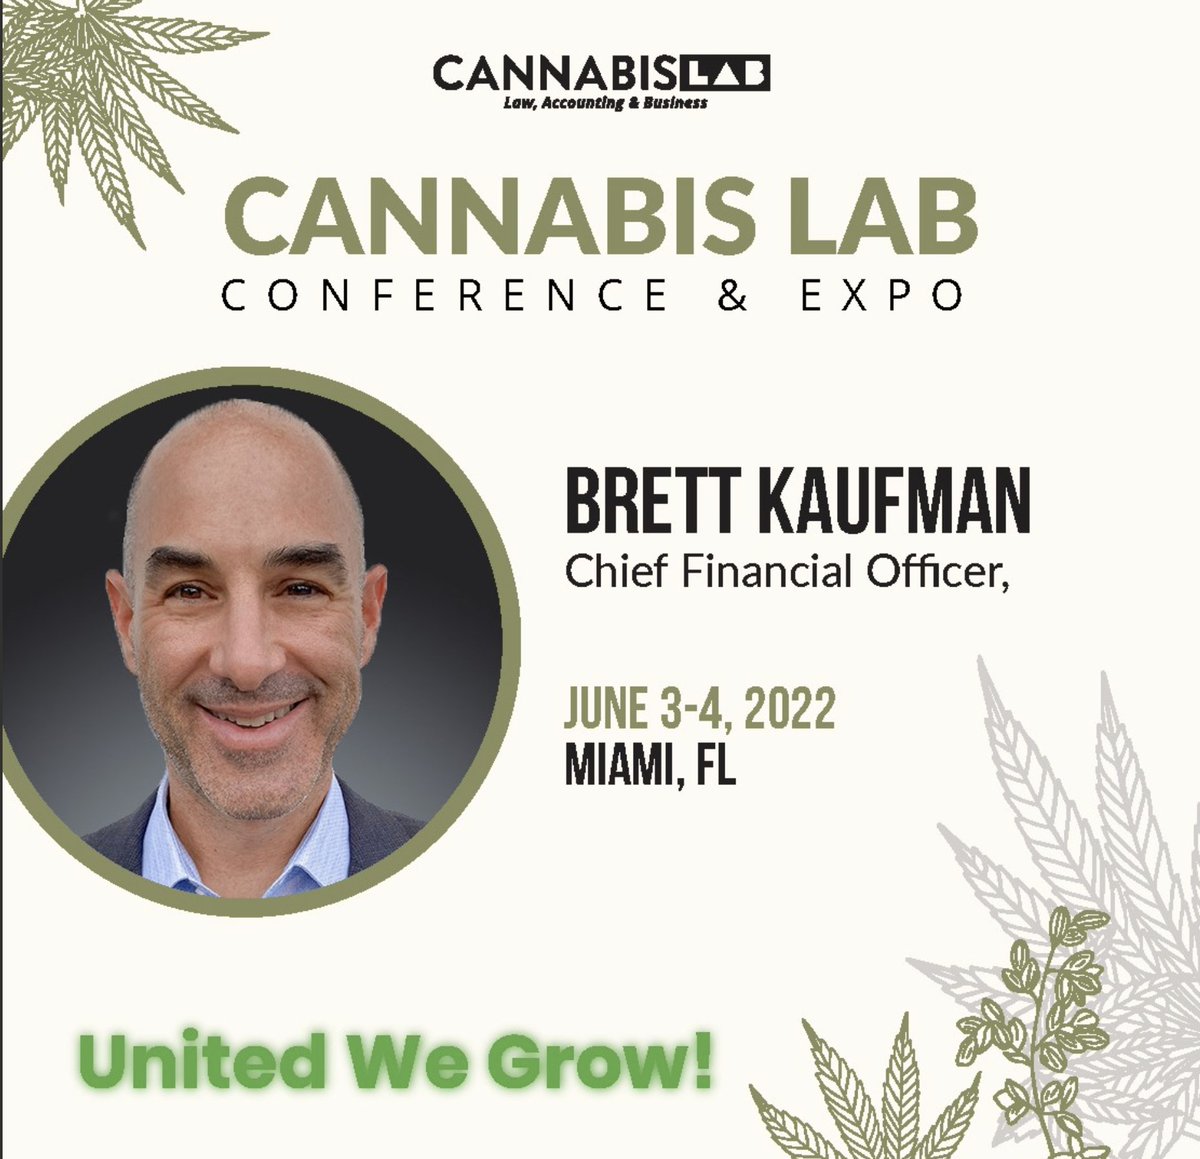 AFC_Cannabis: $AFCG Join us in Miami to hear from our CFO Brett Kaufman, CPA on why the industry is an ever growing opportunity. The panel is Knowing What a Winner Looks Like: Best Practices for Investor Due Diligence and Underwriting.
#cannabisindustry #lendingsolutions